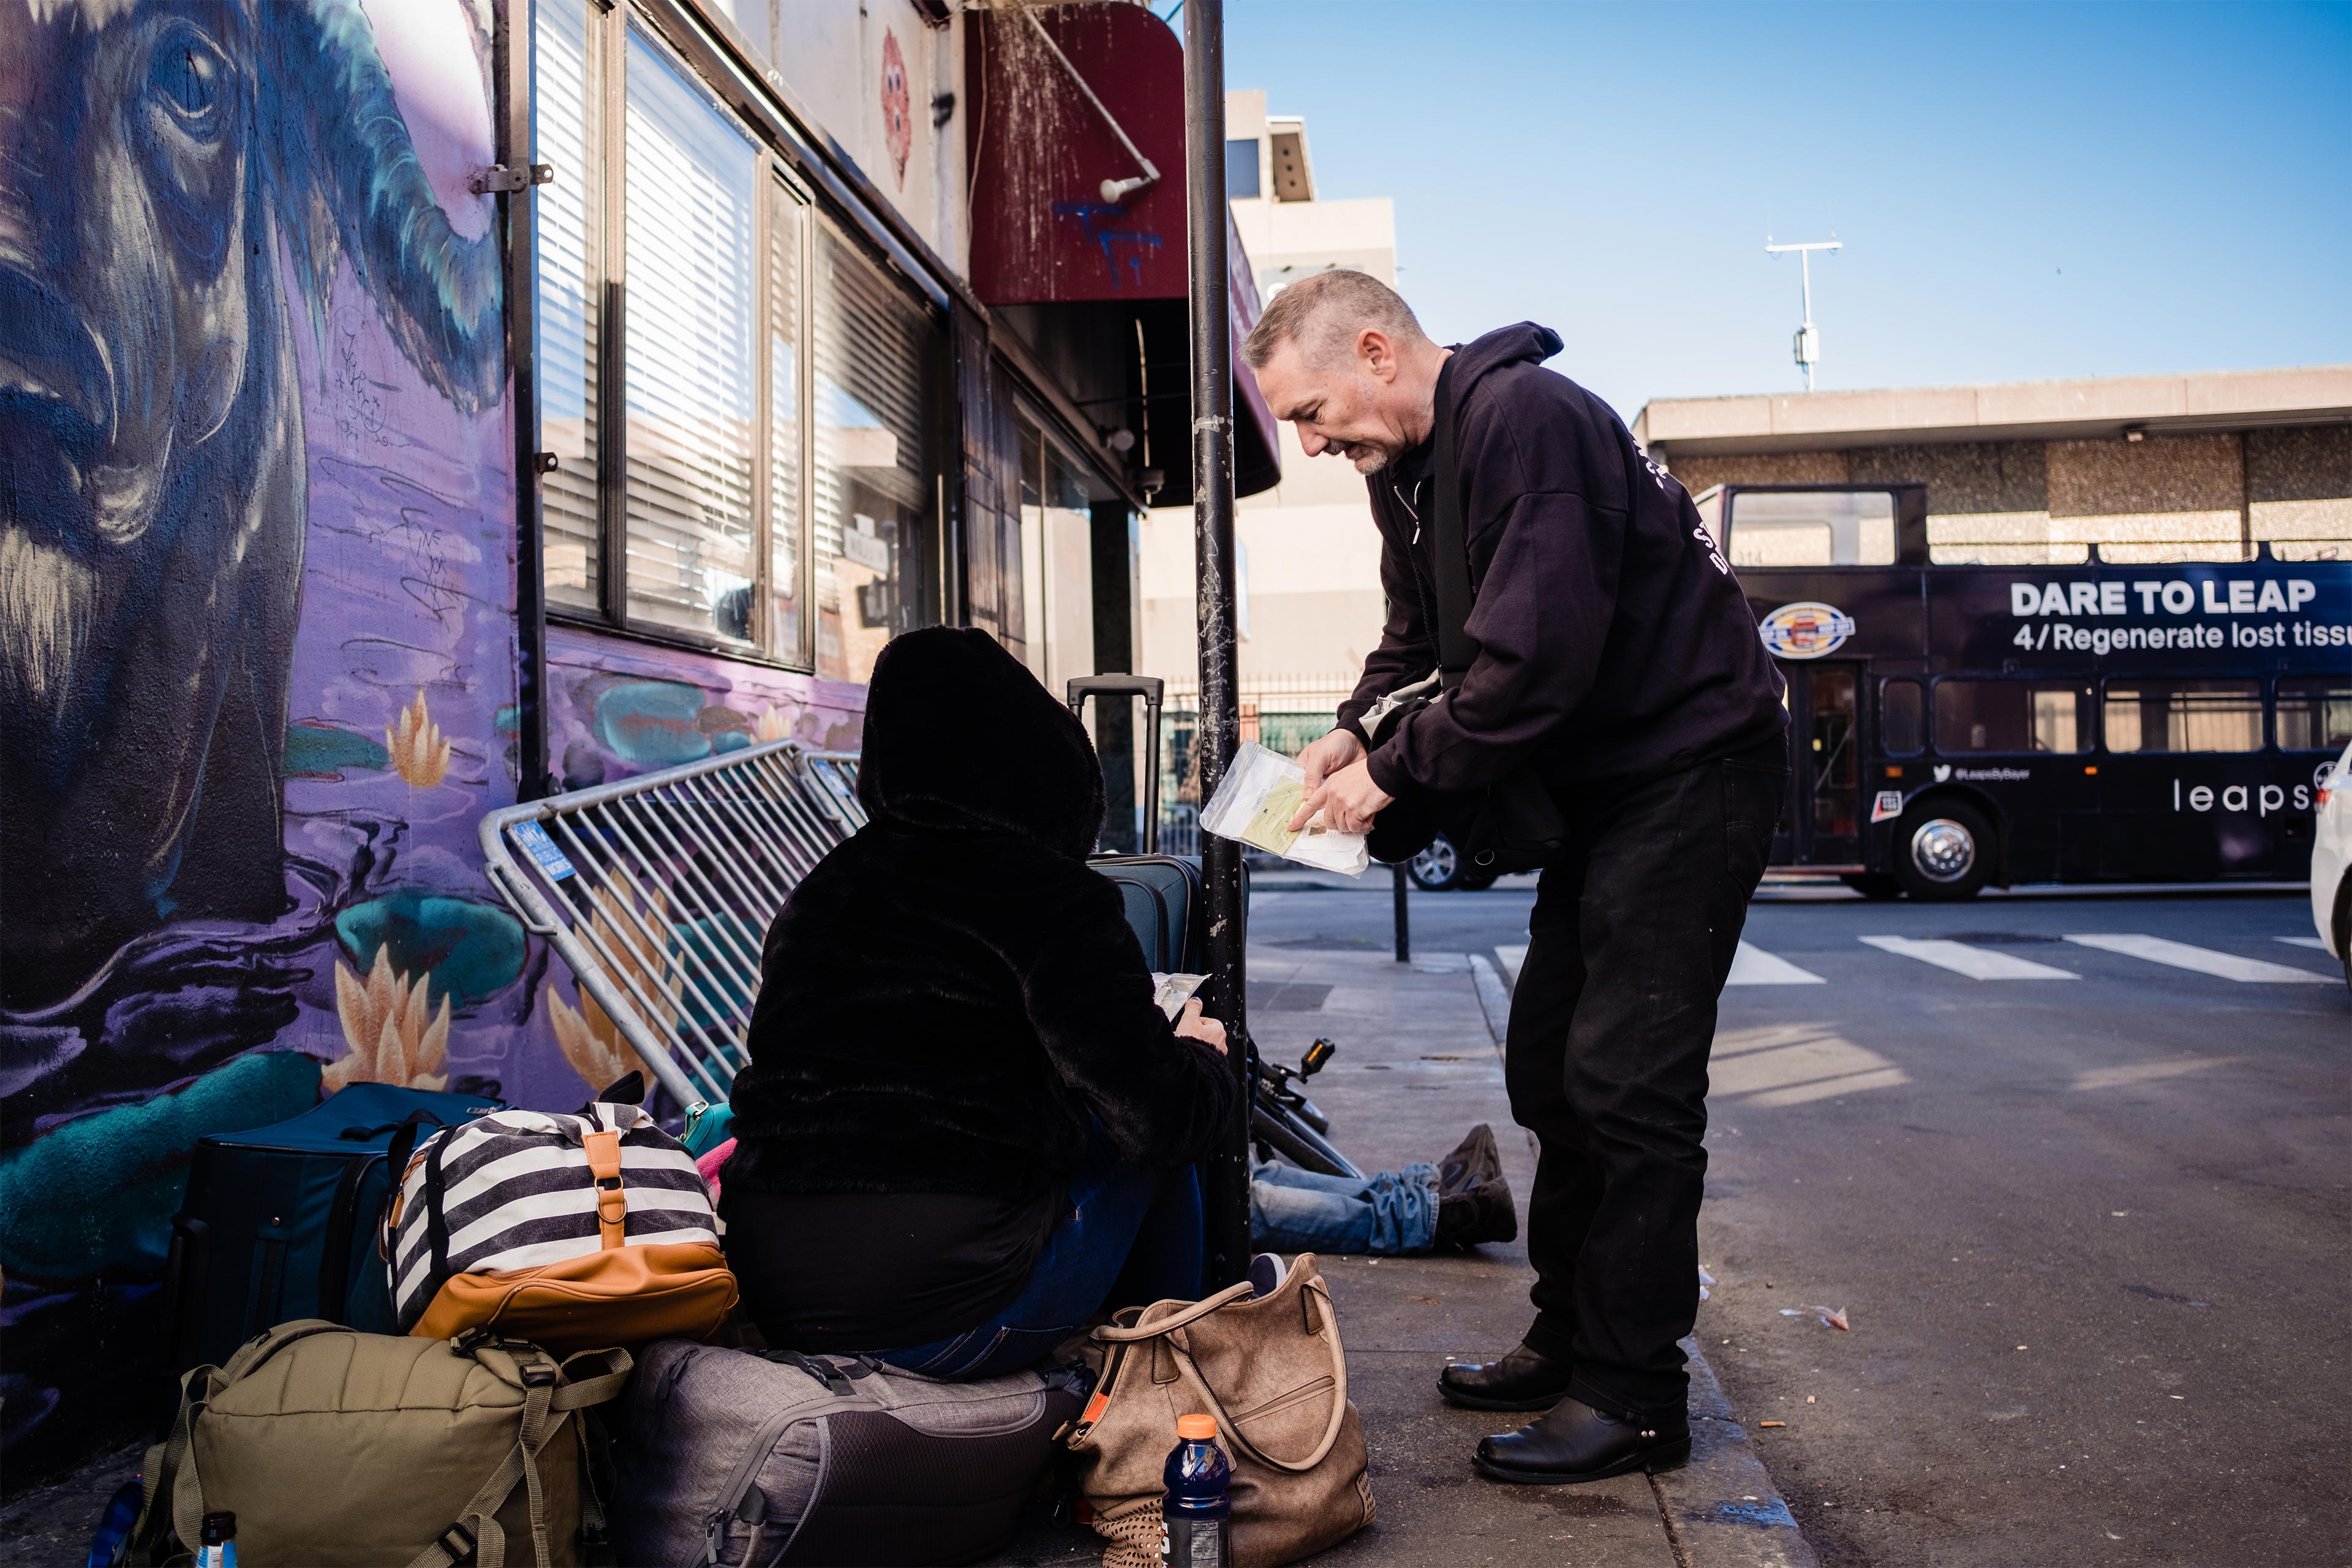 A photo of a man handing out materials to a group of people sitting on the sidewalk.